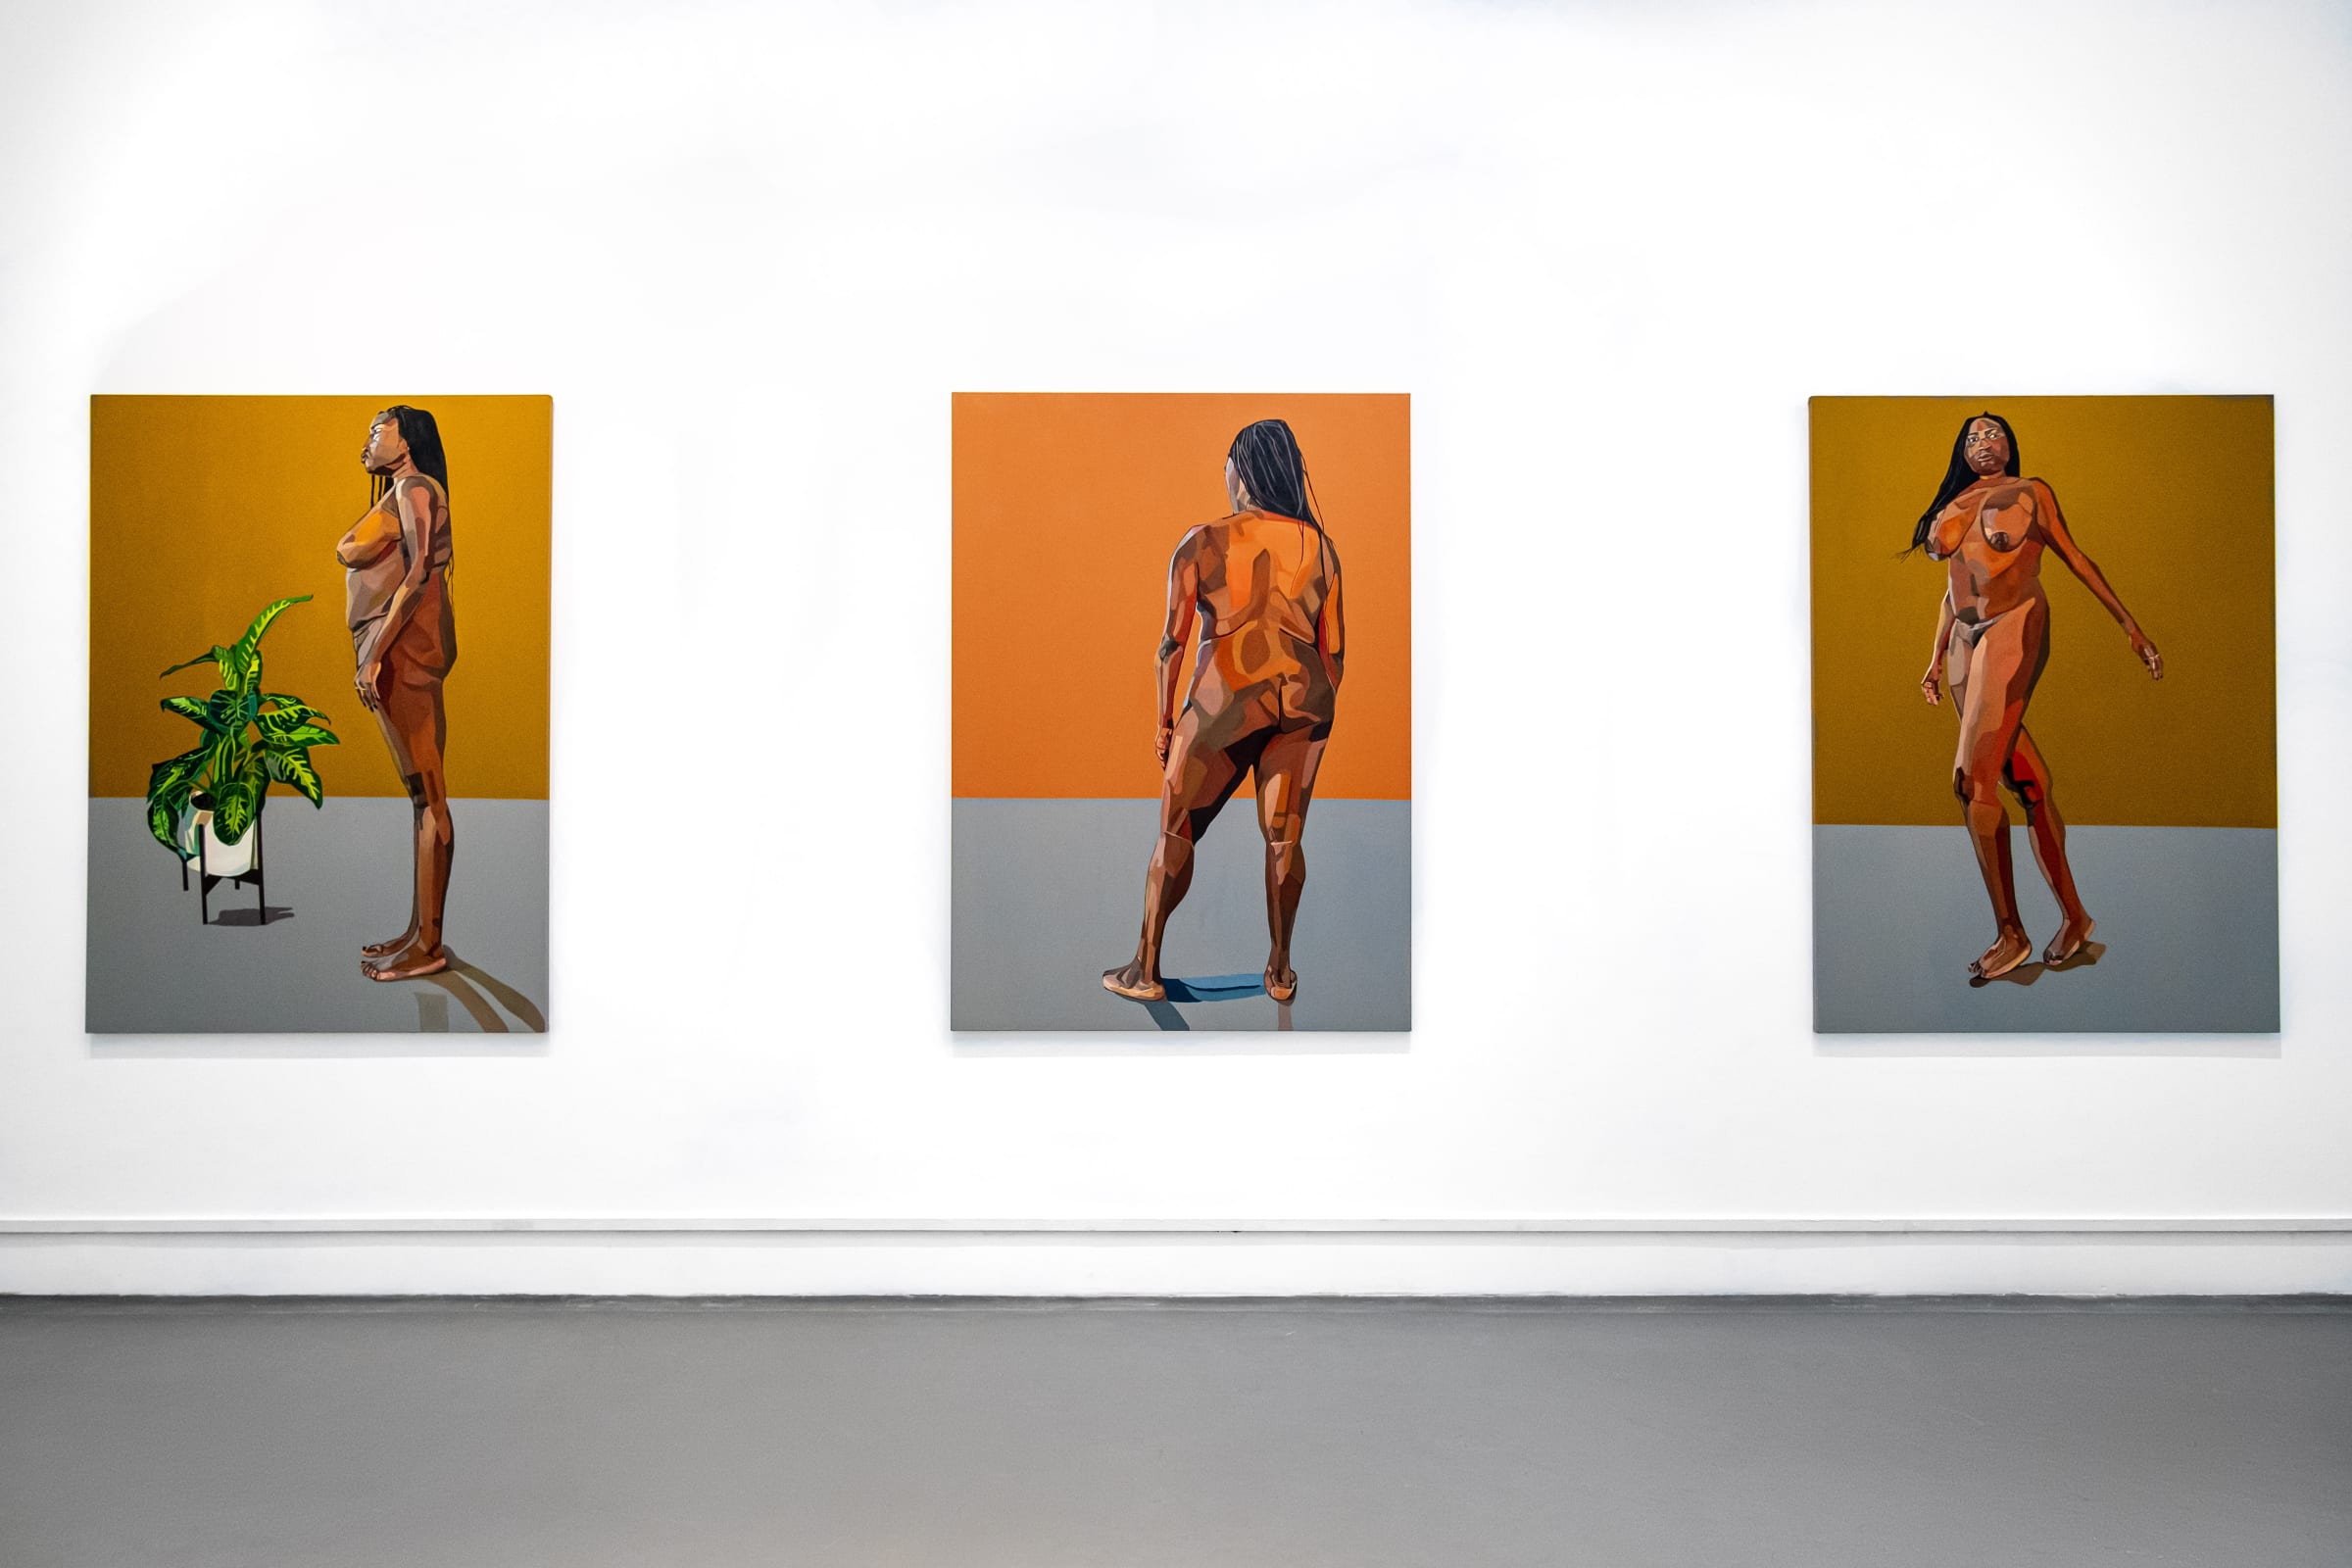 Three vertical, earth-toned, figurative paintings hang on a white gallery wall. Each depicts a nude woman with medium-dark skin standing in different postures: to the side, with her back to the viewer, and in motion turning around. The first painting also includes a lush green plant in a white pot.